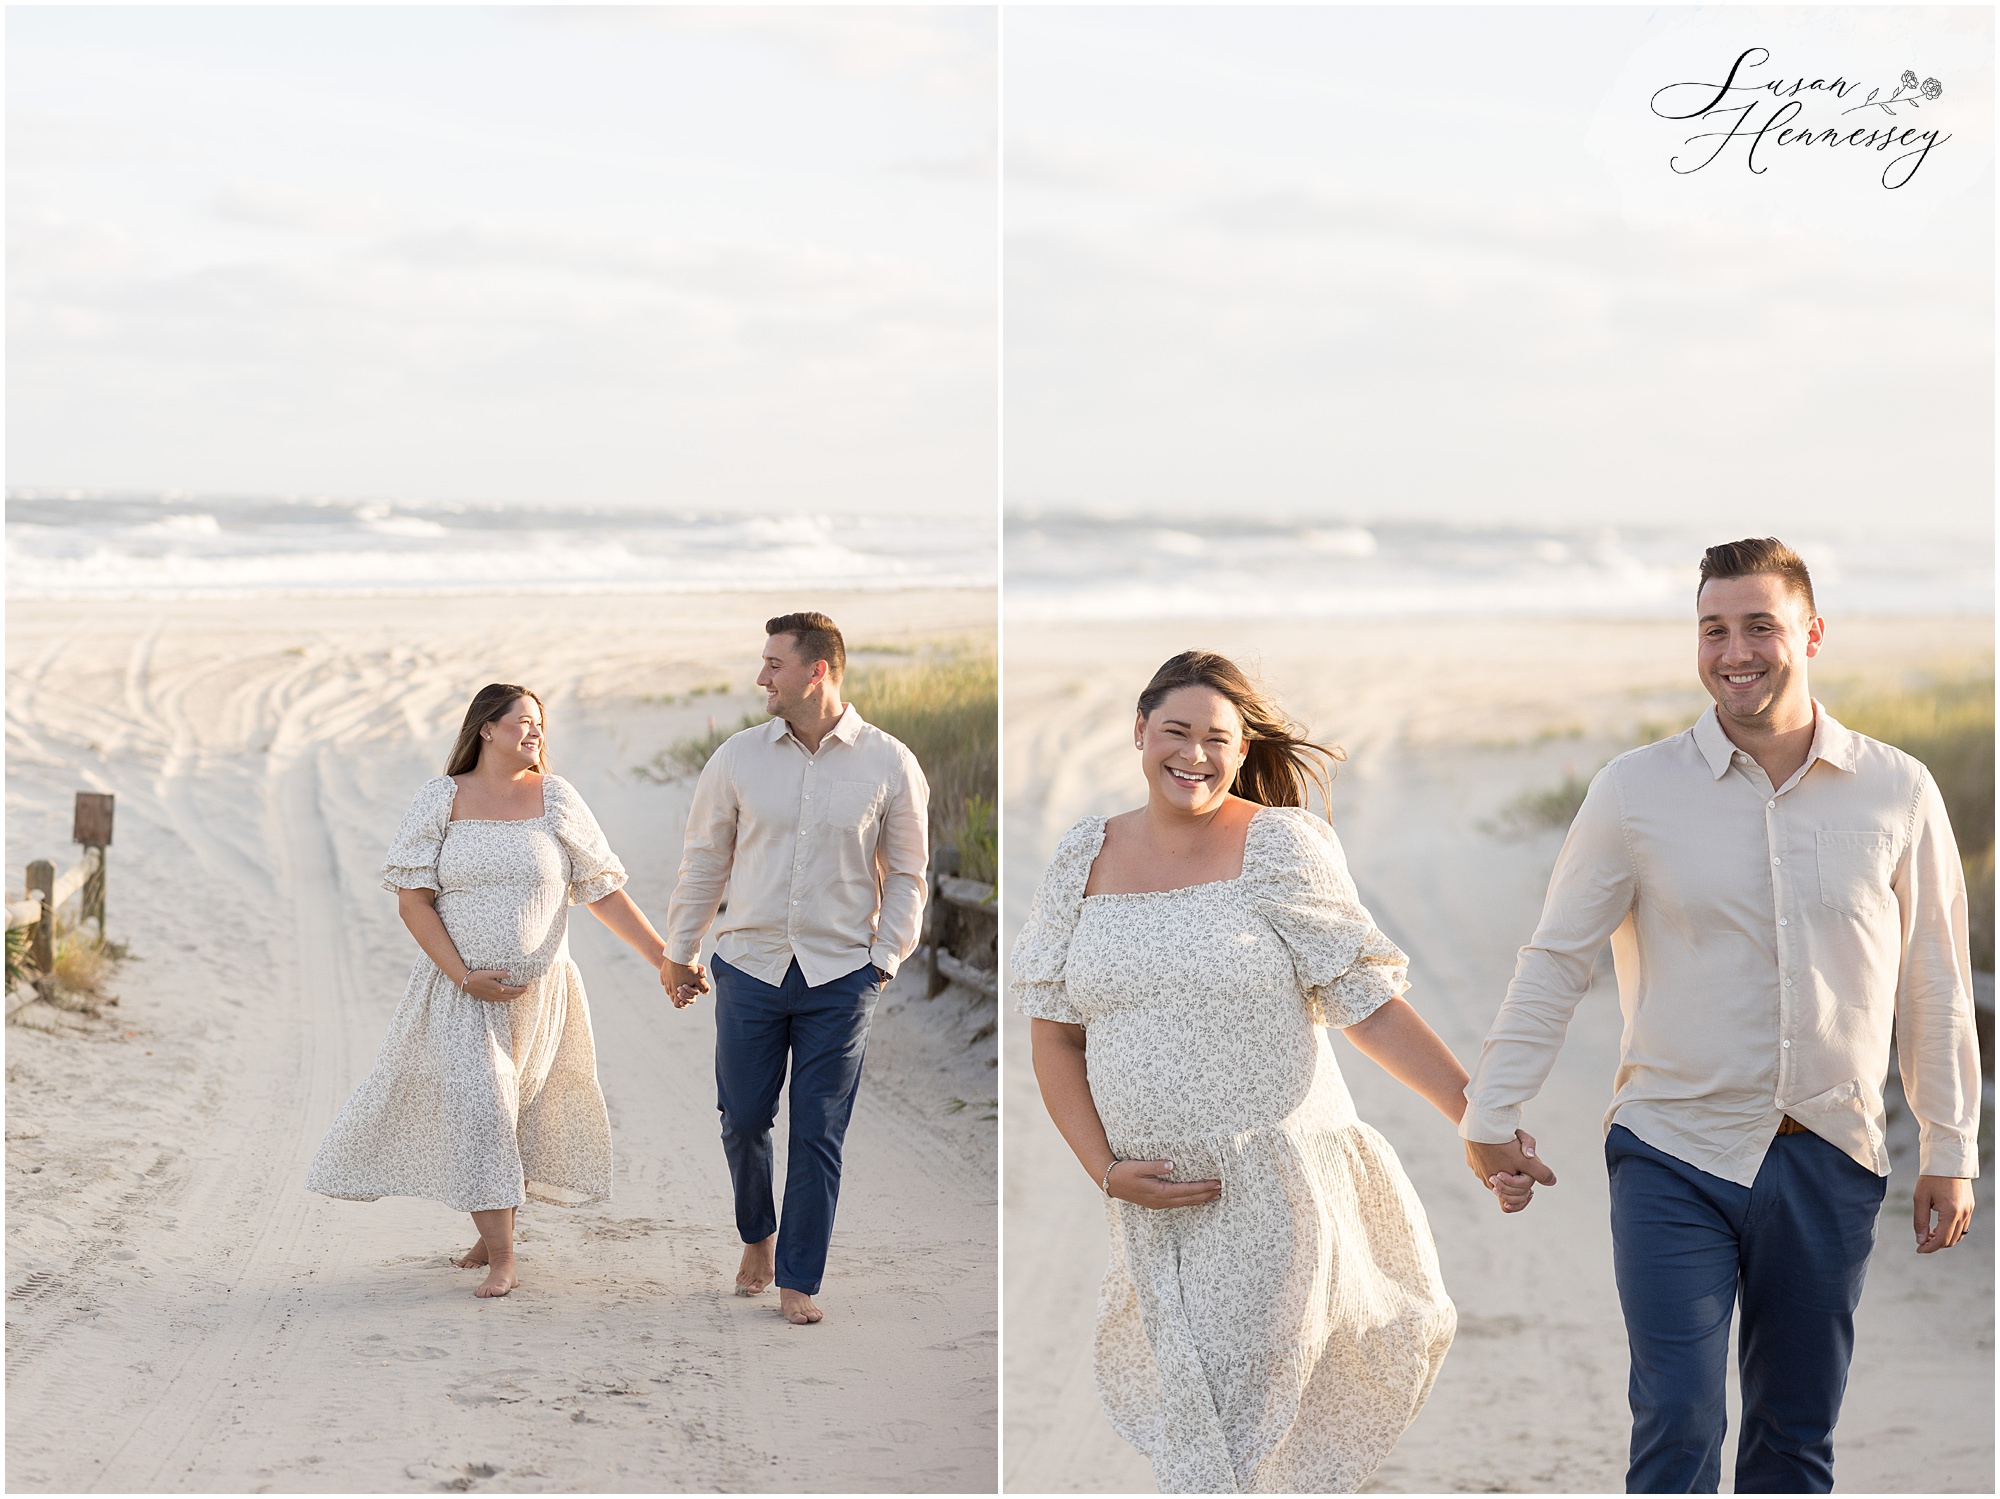 Couple portraits at maternity session